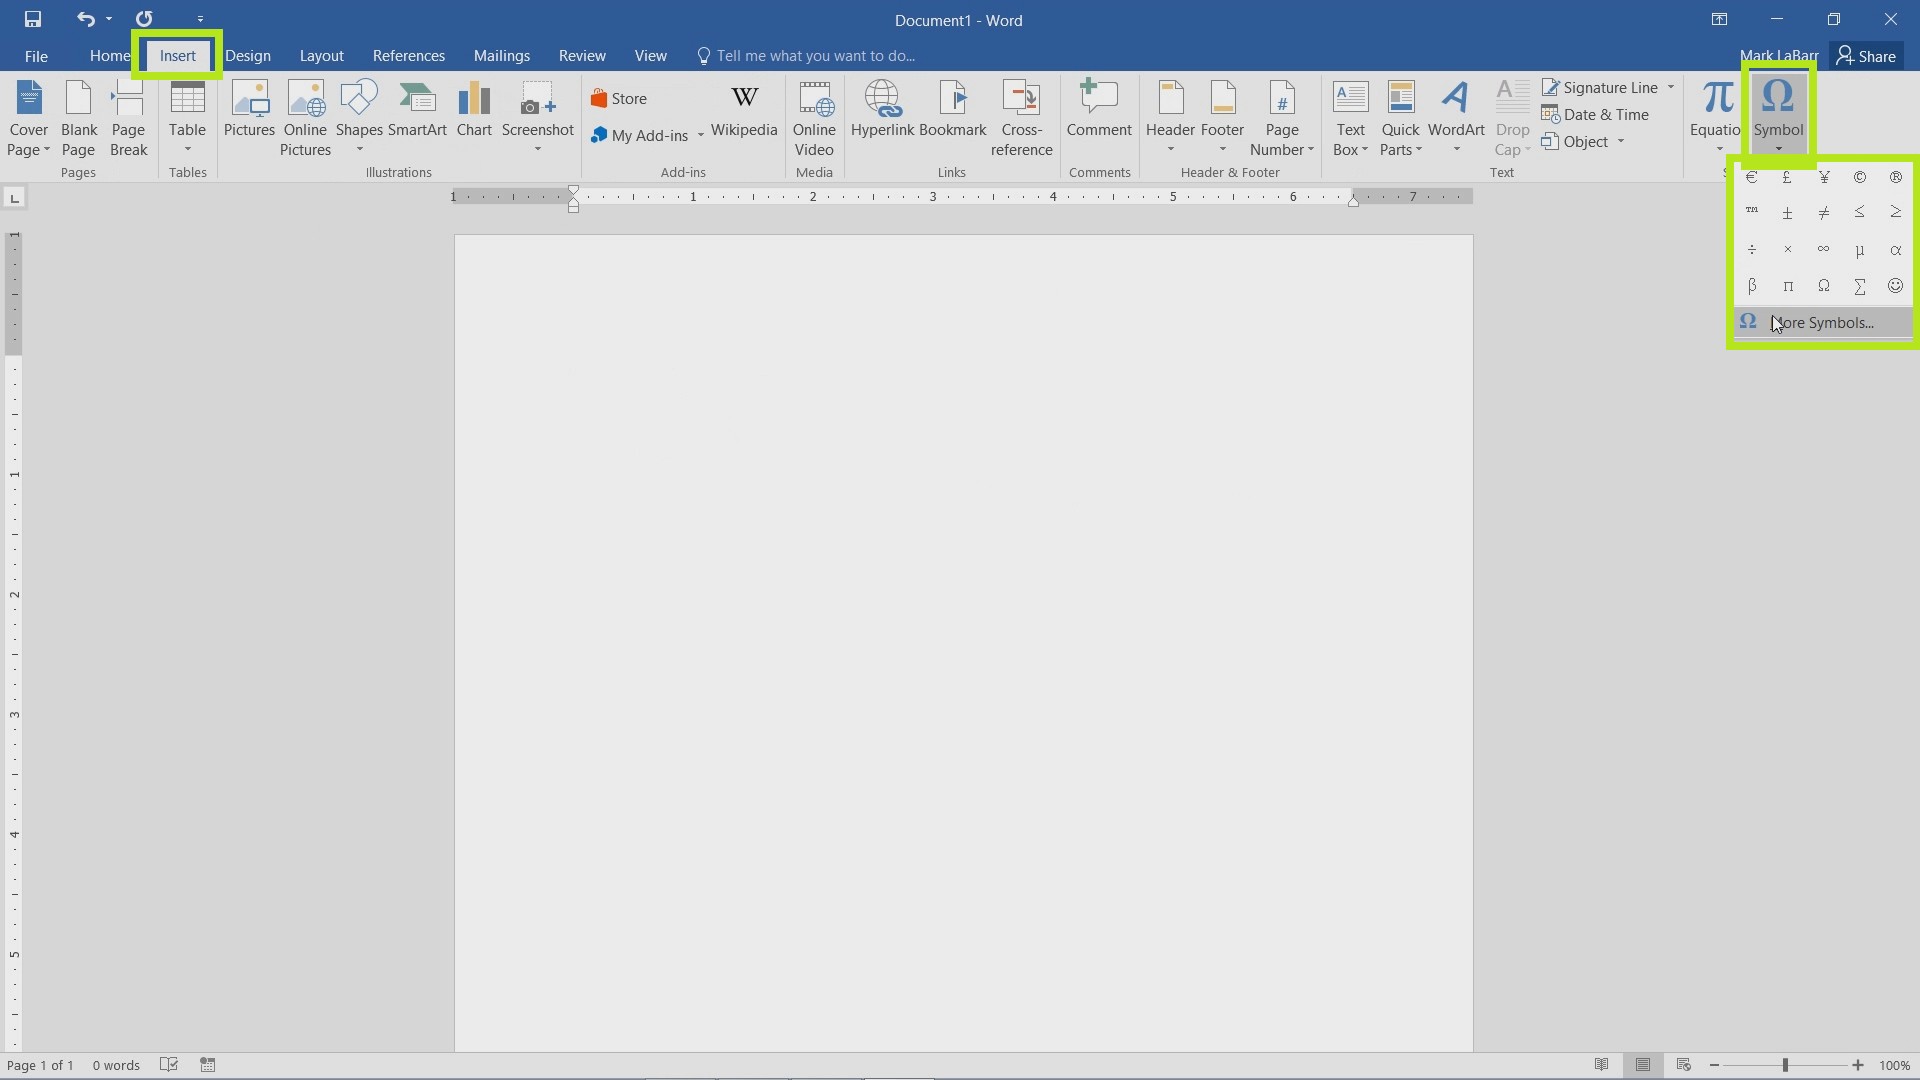 Type and Insert Symbols in Word 2016